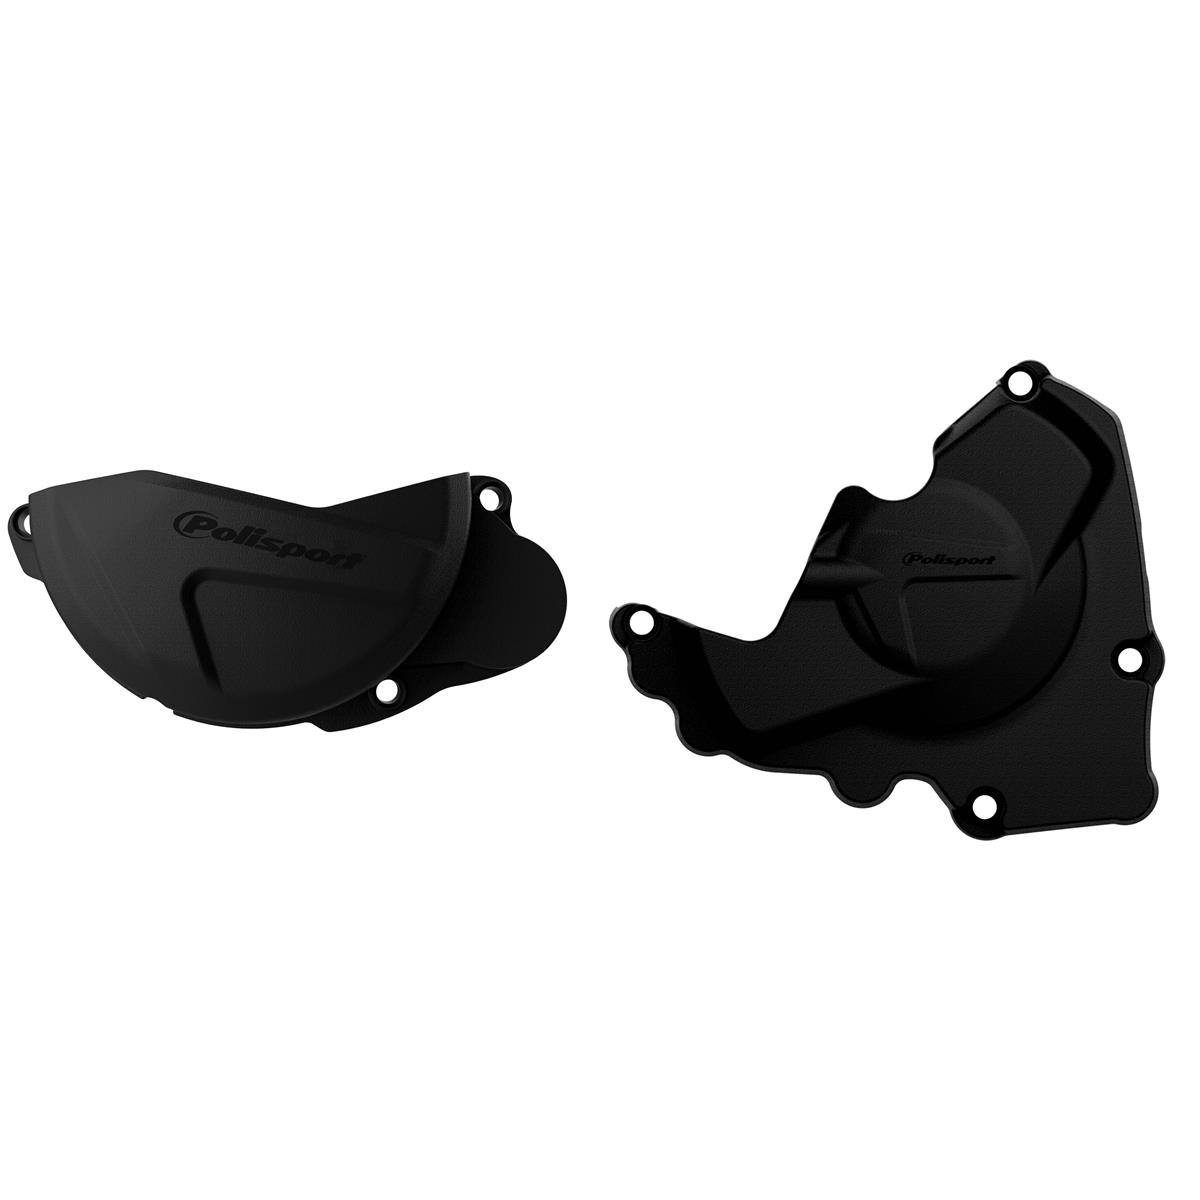 Polisport Clutch/Ignition Cover Protection  Honda CRF 250 10-17, Black